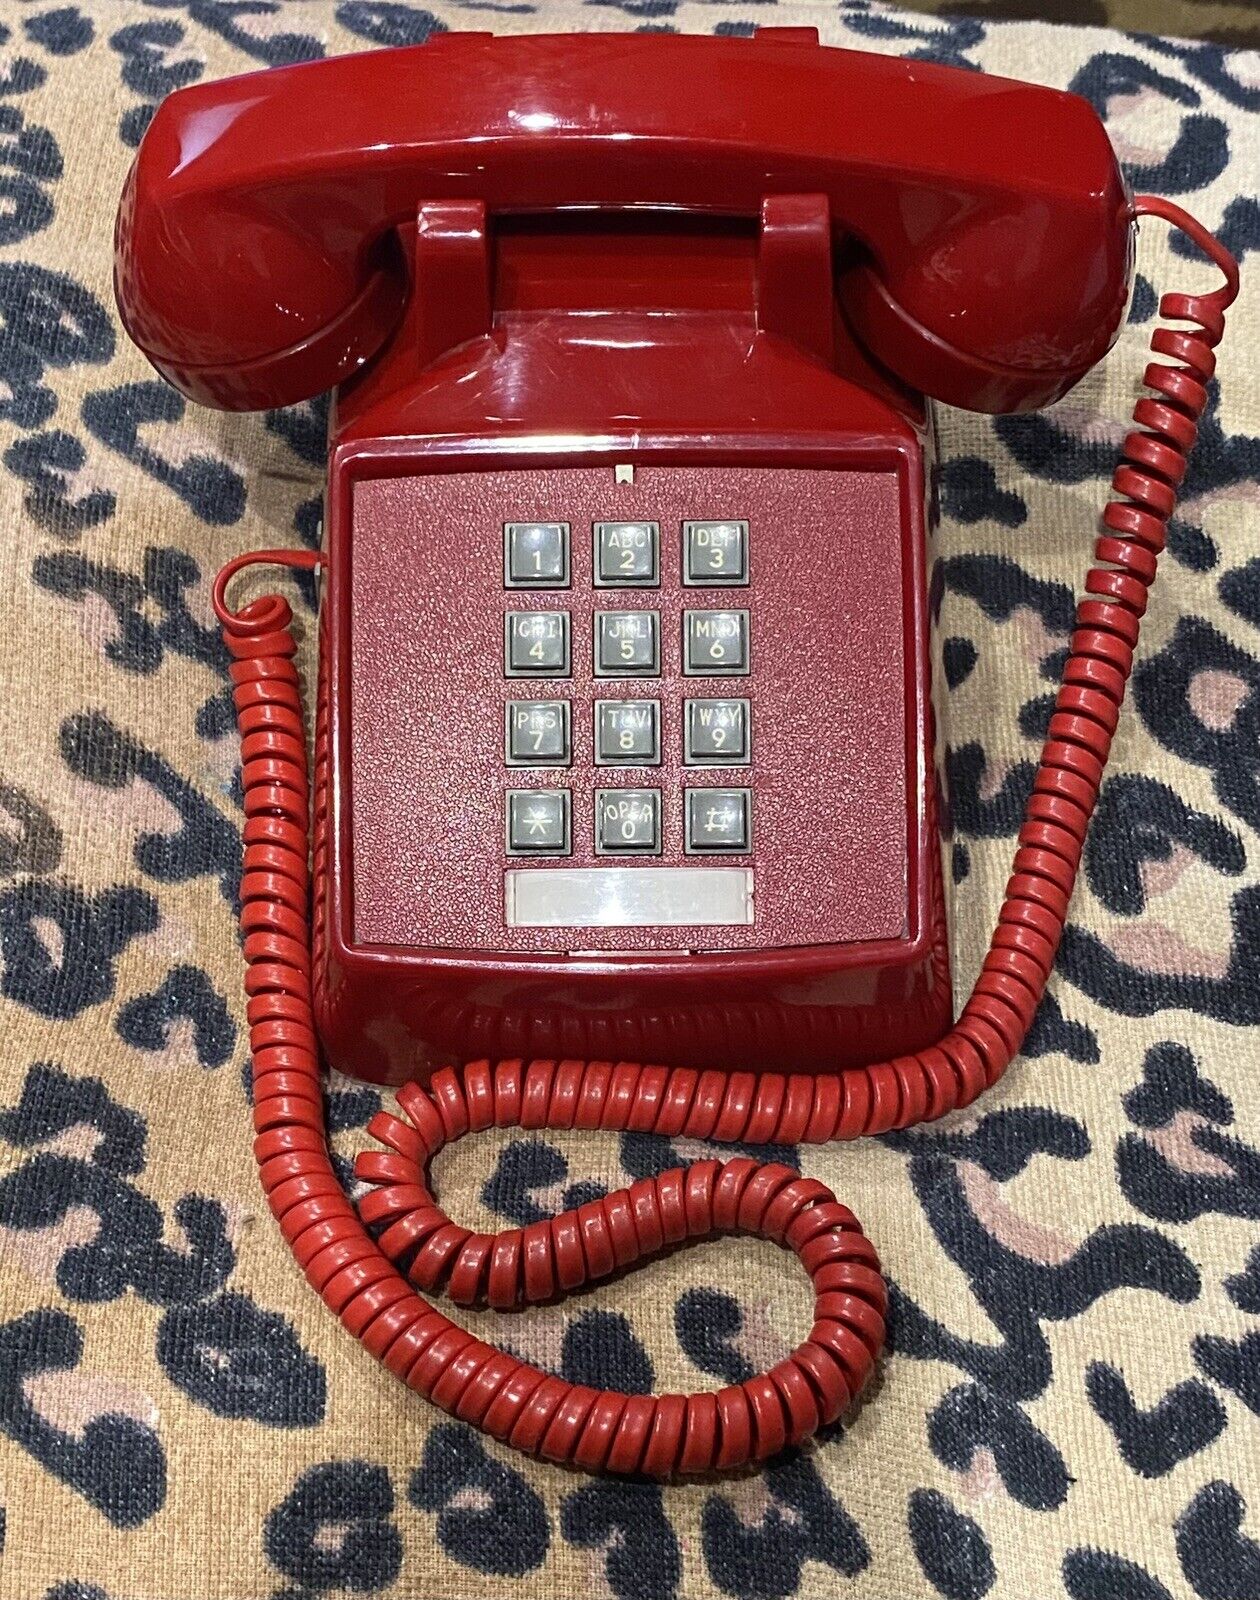 Vintage Red Push Button Retro Corded Phone Desk Telephone - Untested-Clean